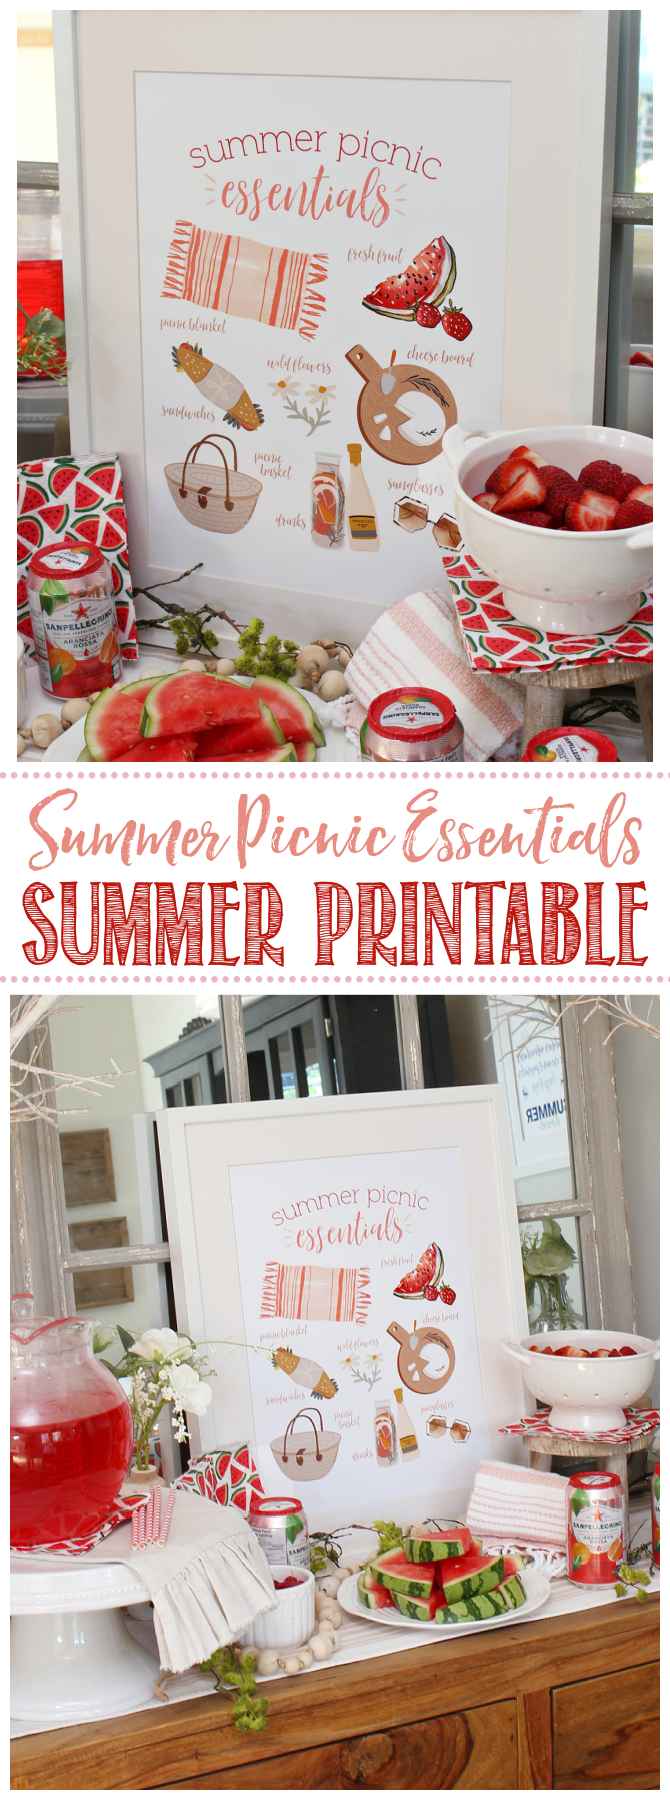 Summer Picnic Essentials free printable displayed on a side board.